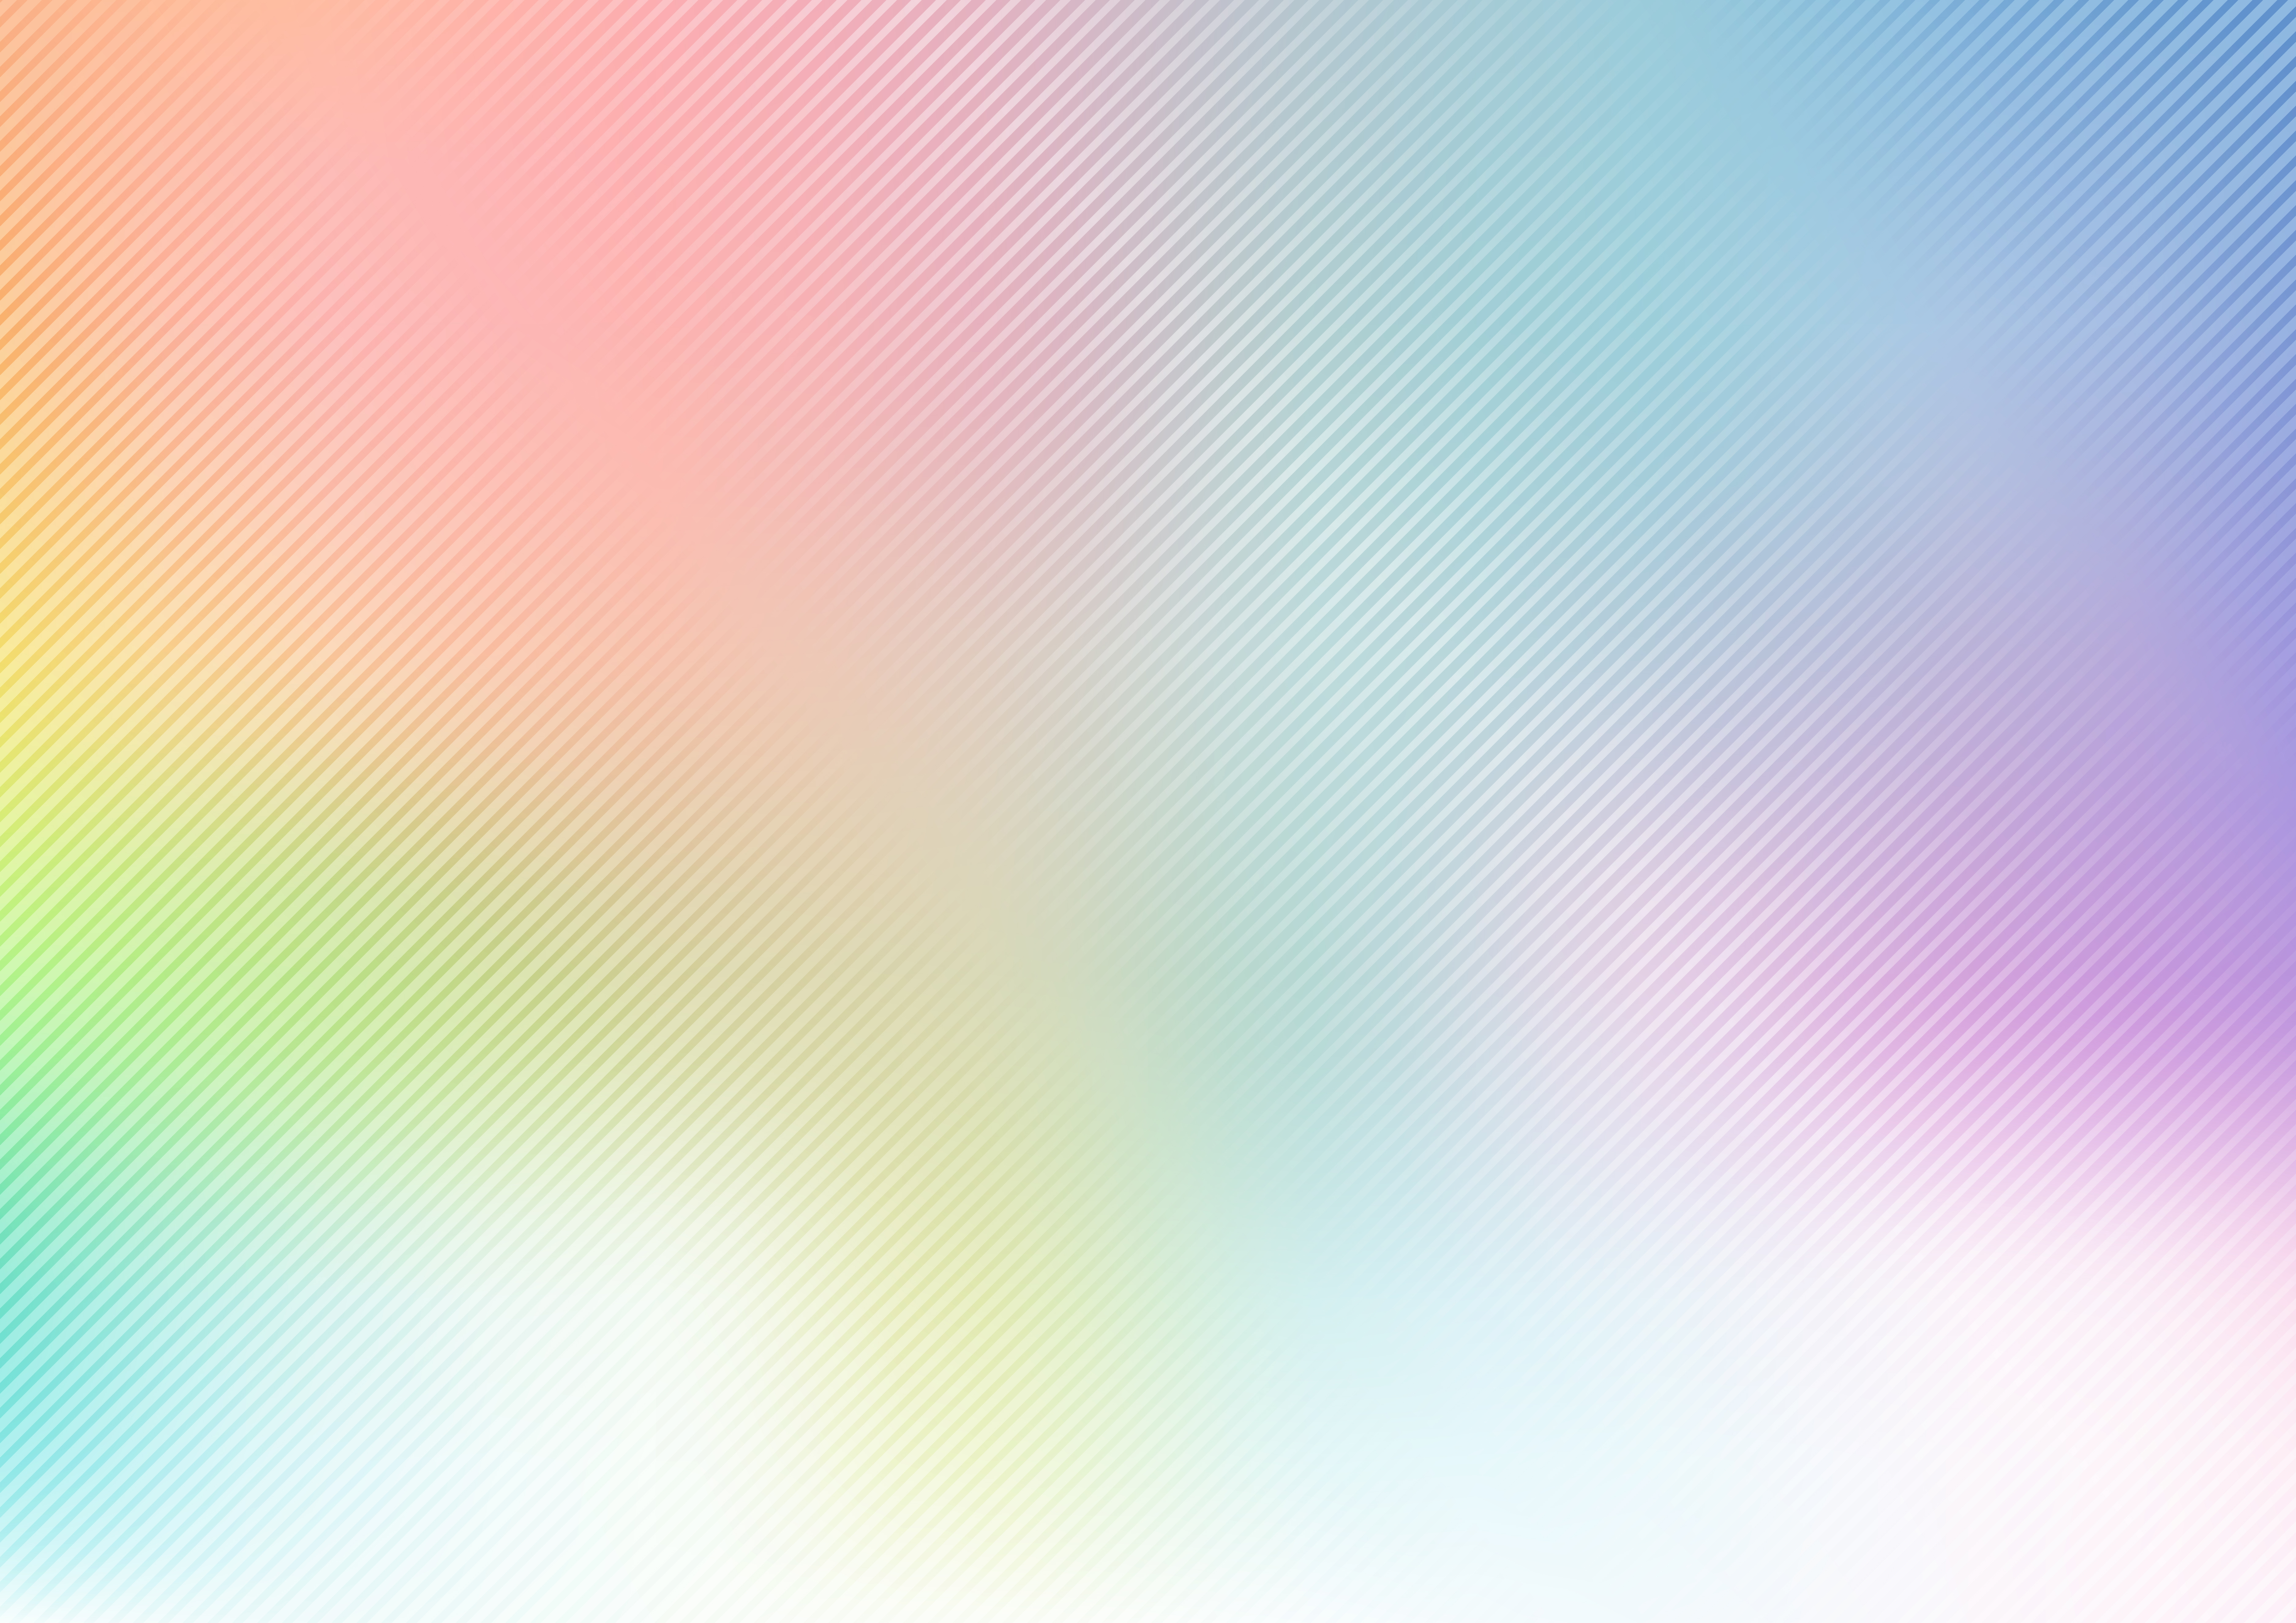 Abstract rainbow pastel blurred soft background with diagonal lines